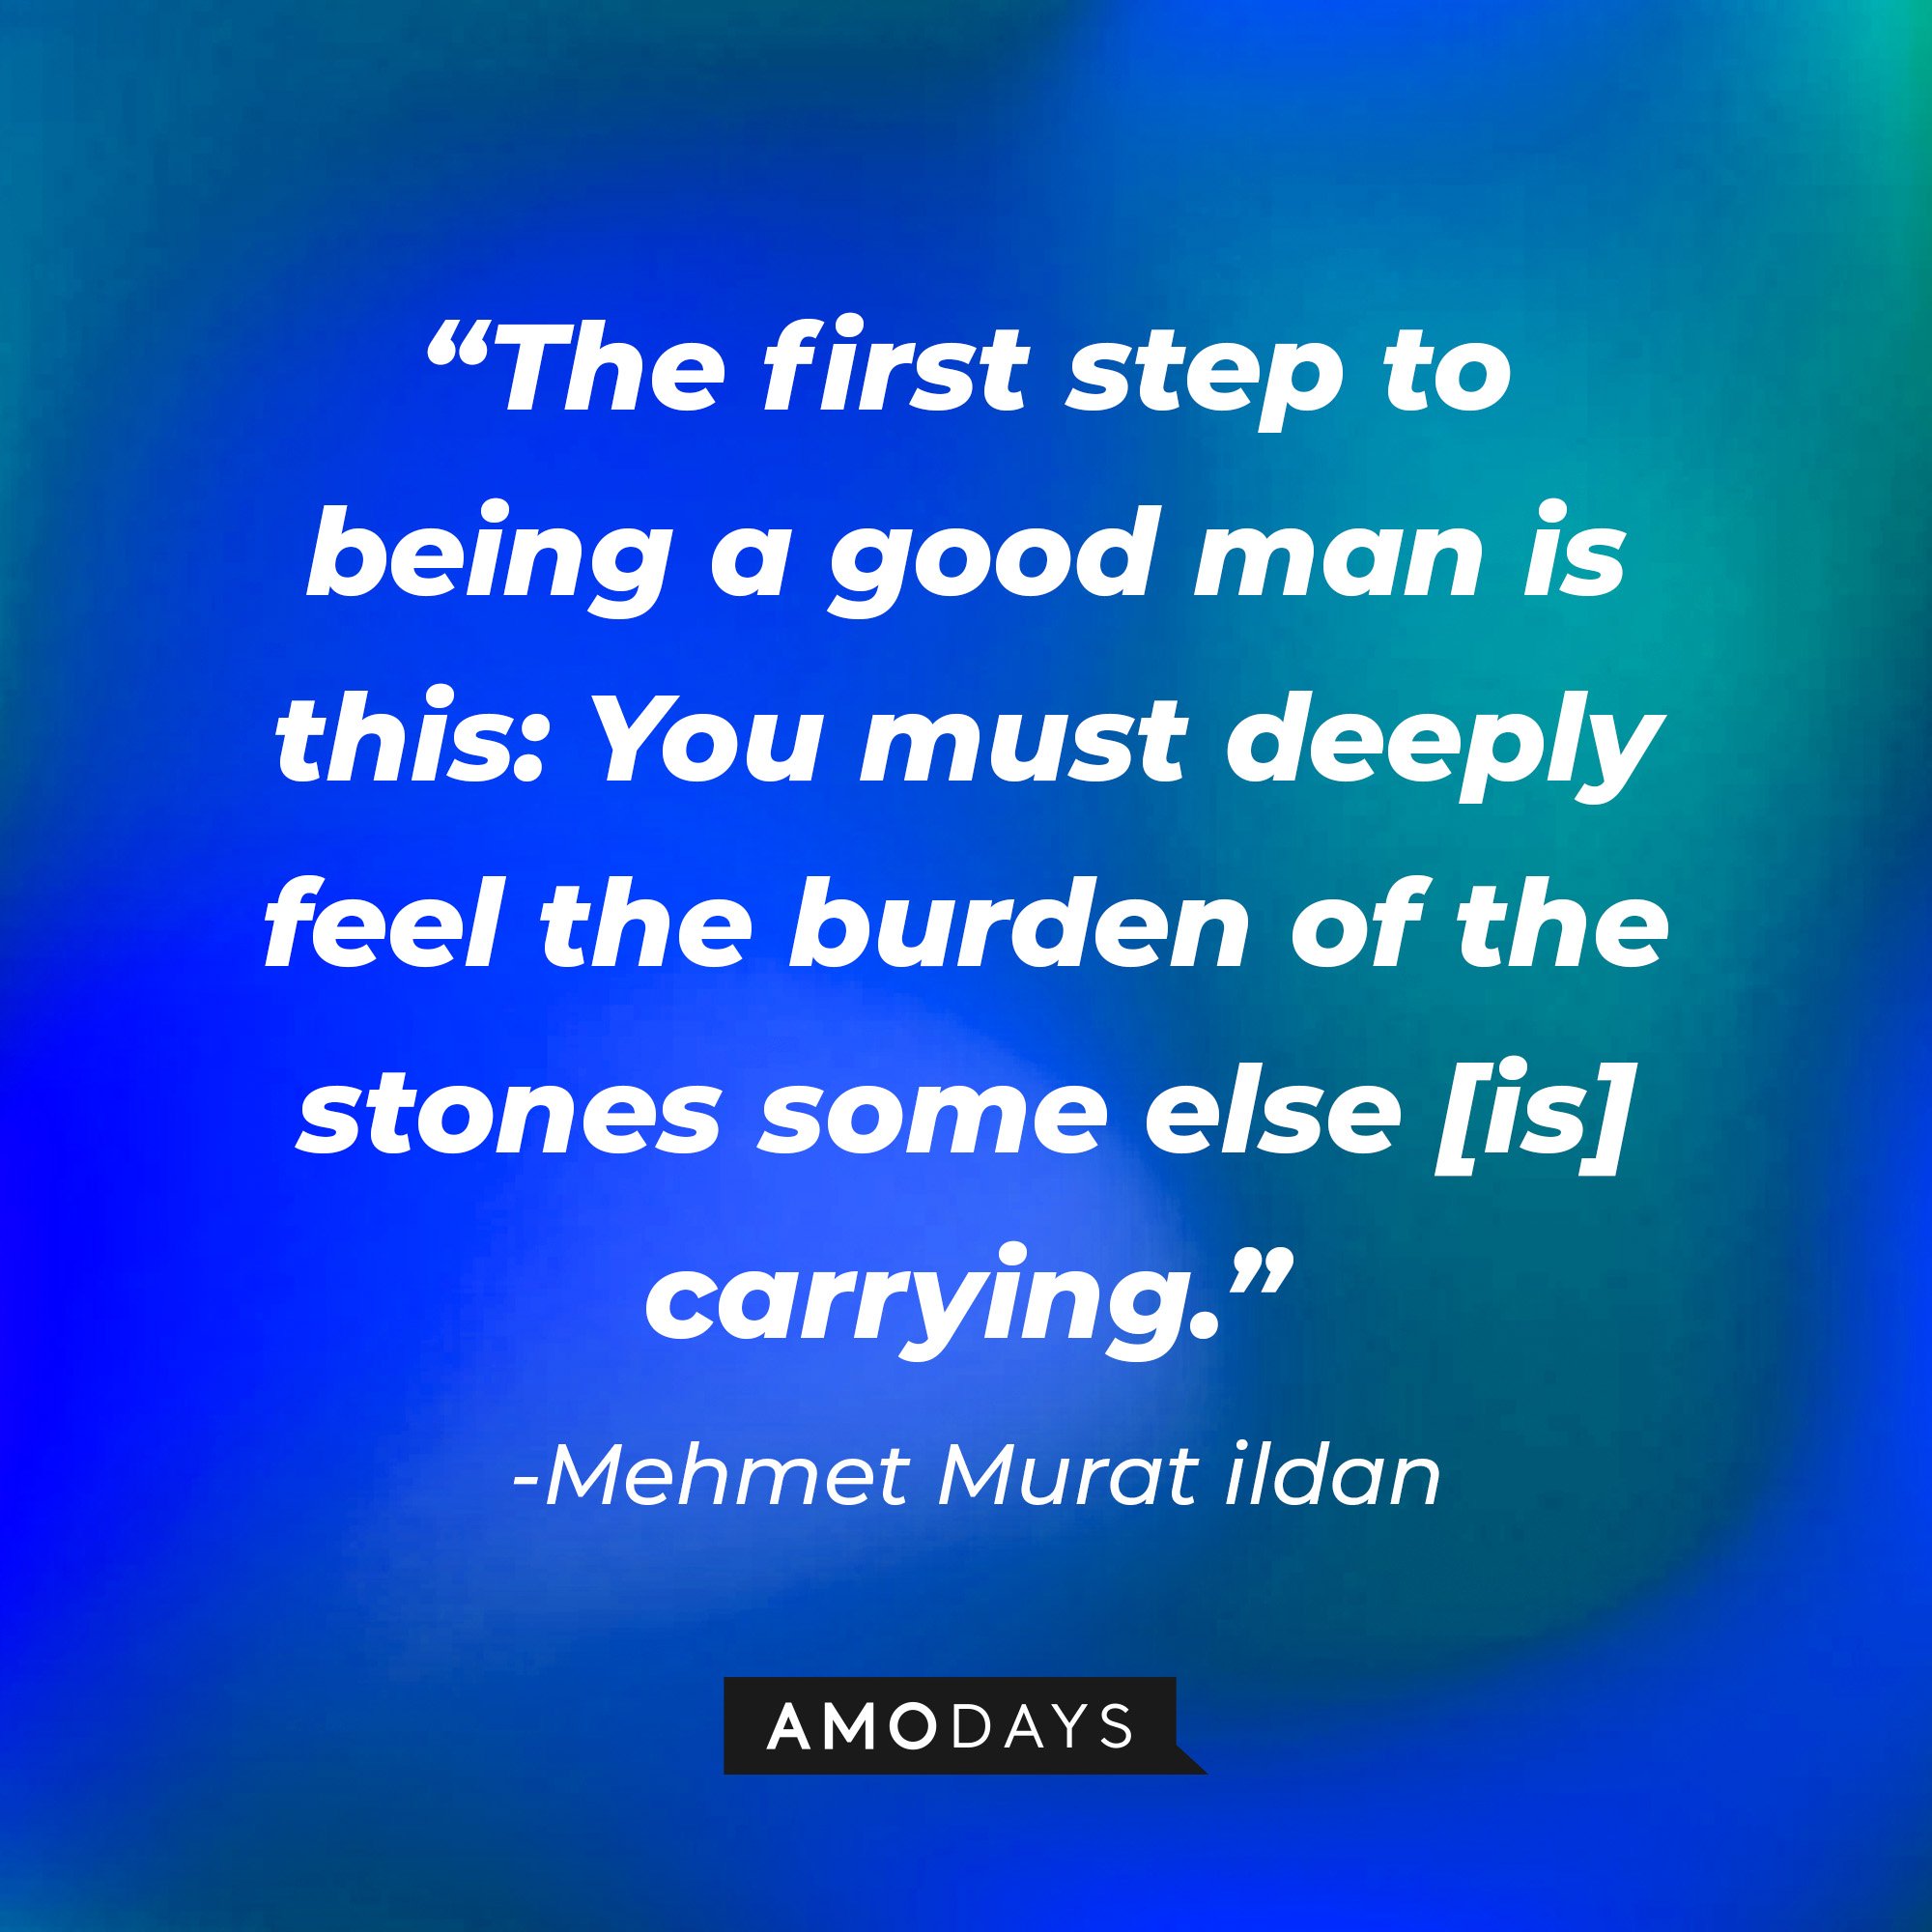  Mehmet Murat ildan's quote:  “The first step to being a good man is this: You must deeply feel the burden of the stones some else [is] carrying.” | Image: AmoDays